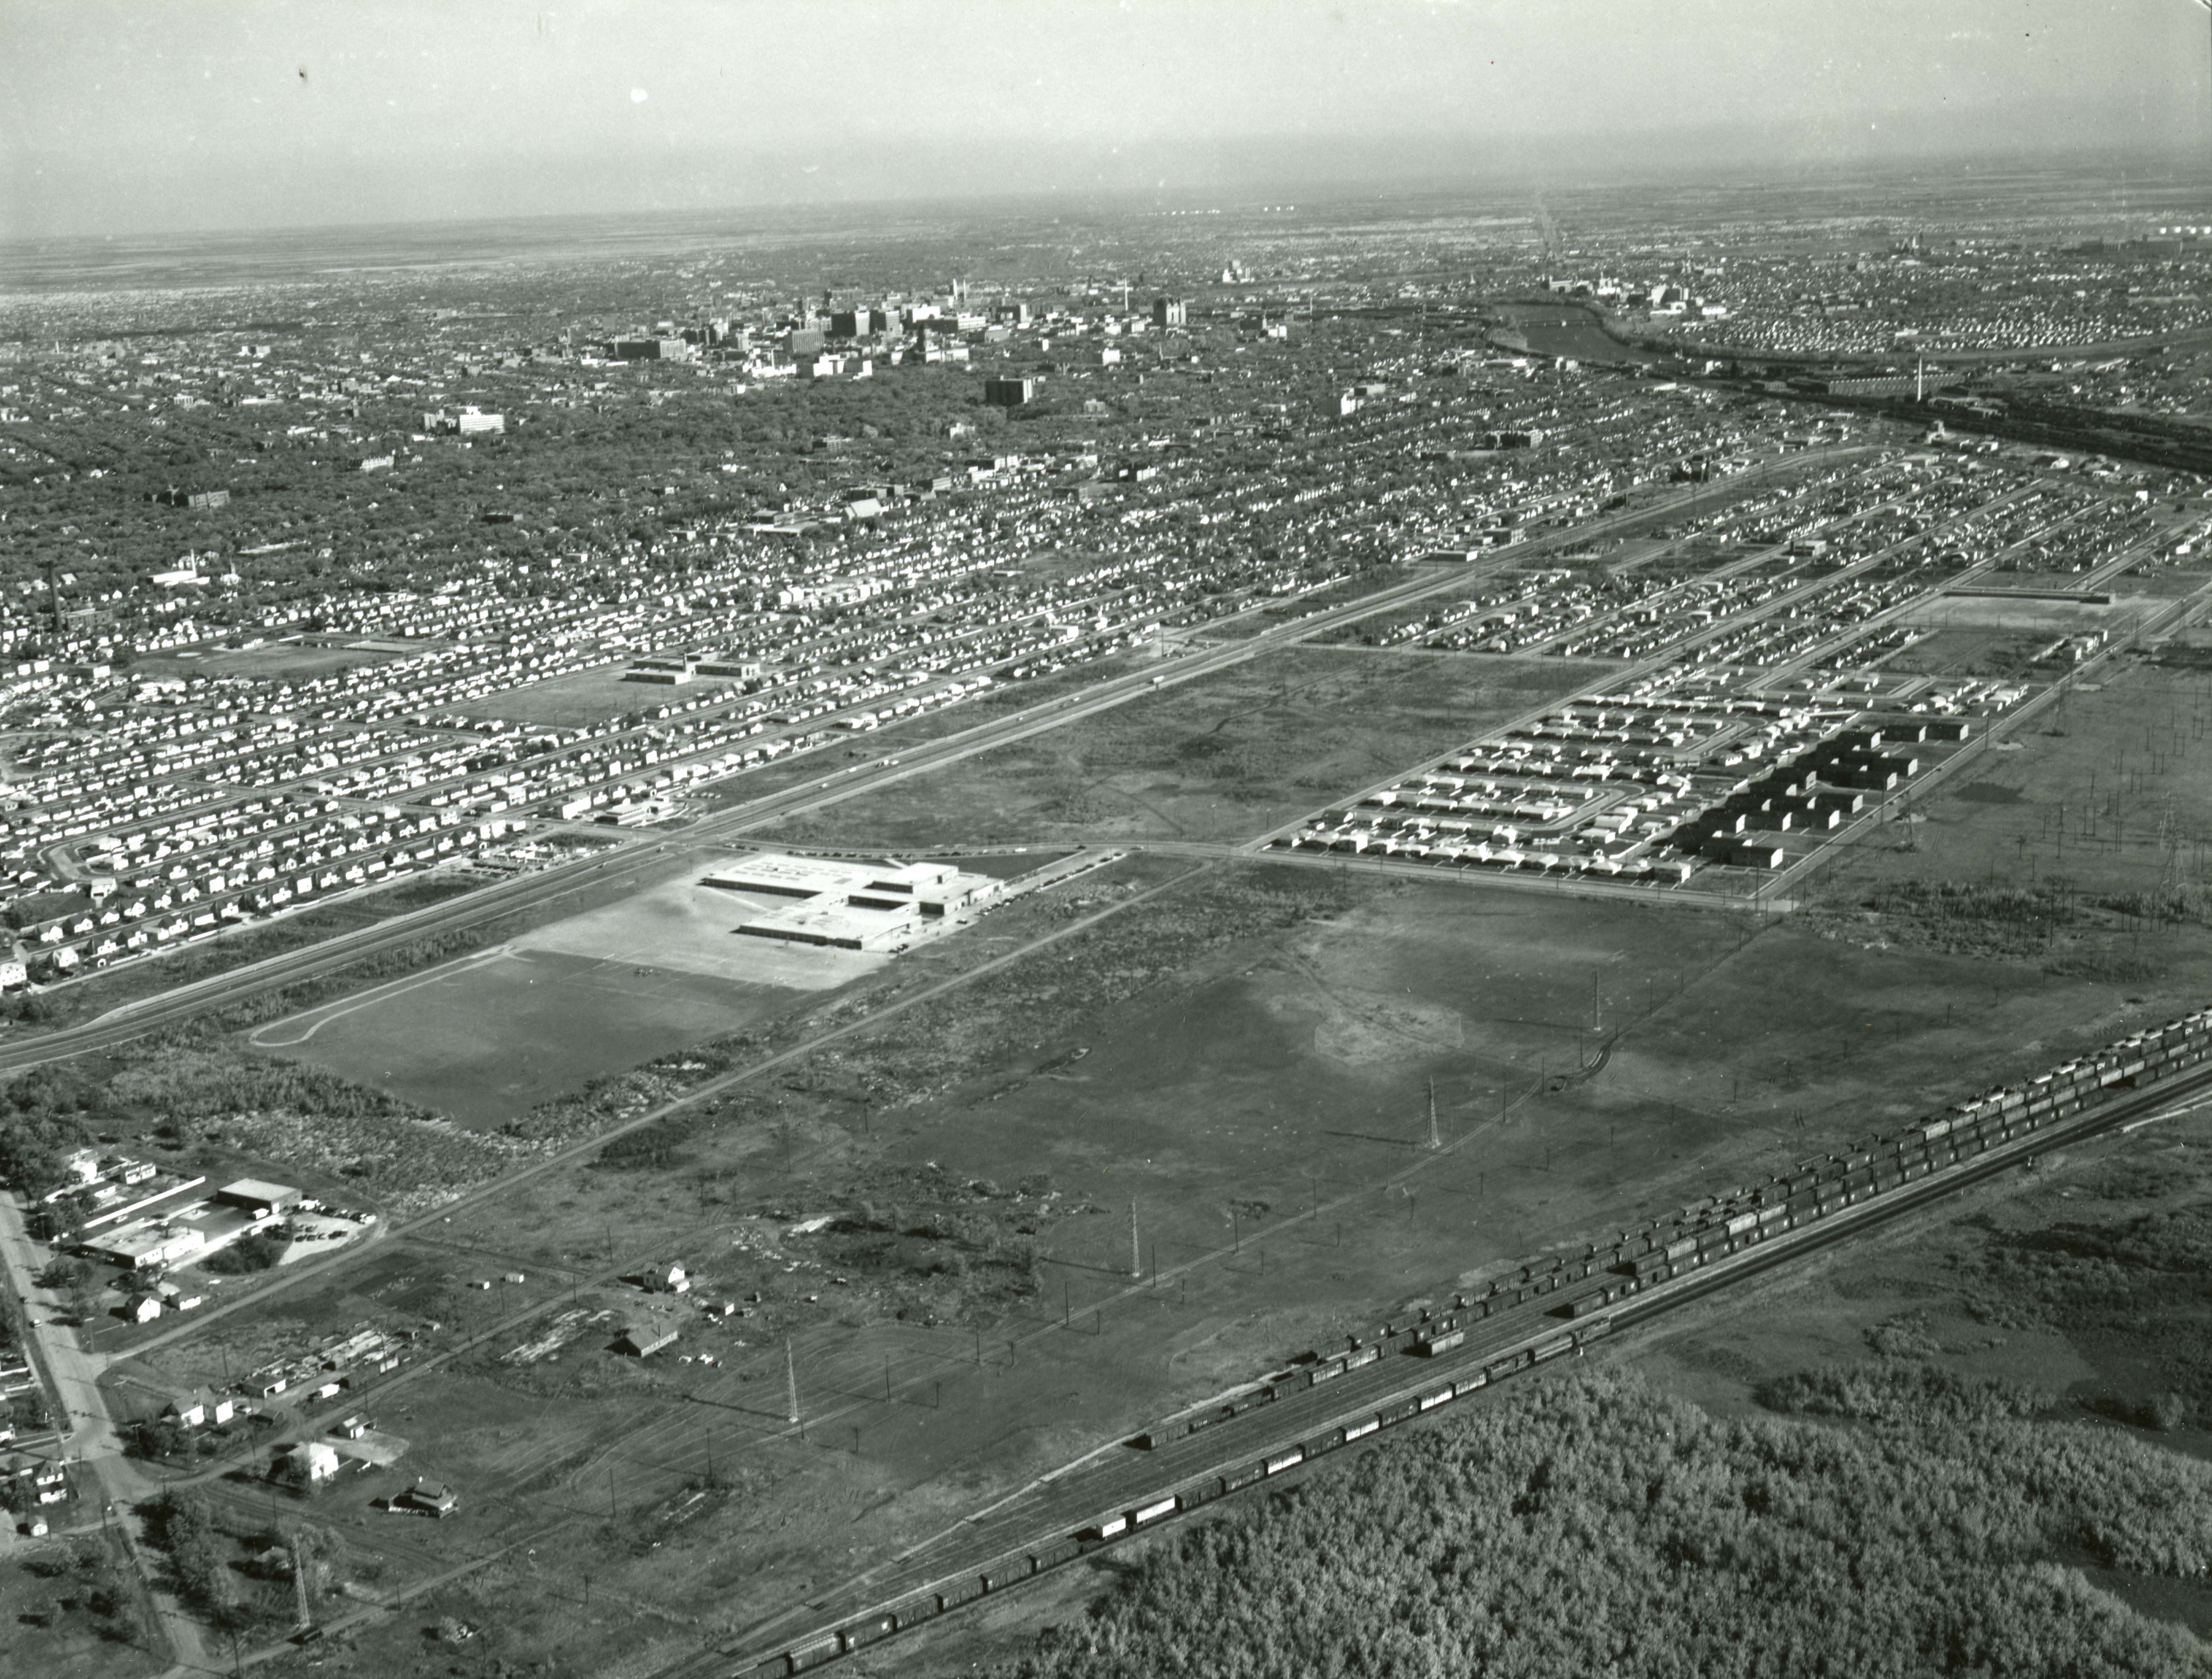 An aerial photo of a sparsely populated area.